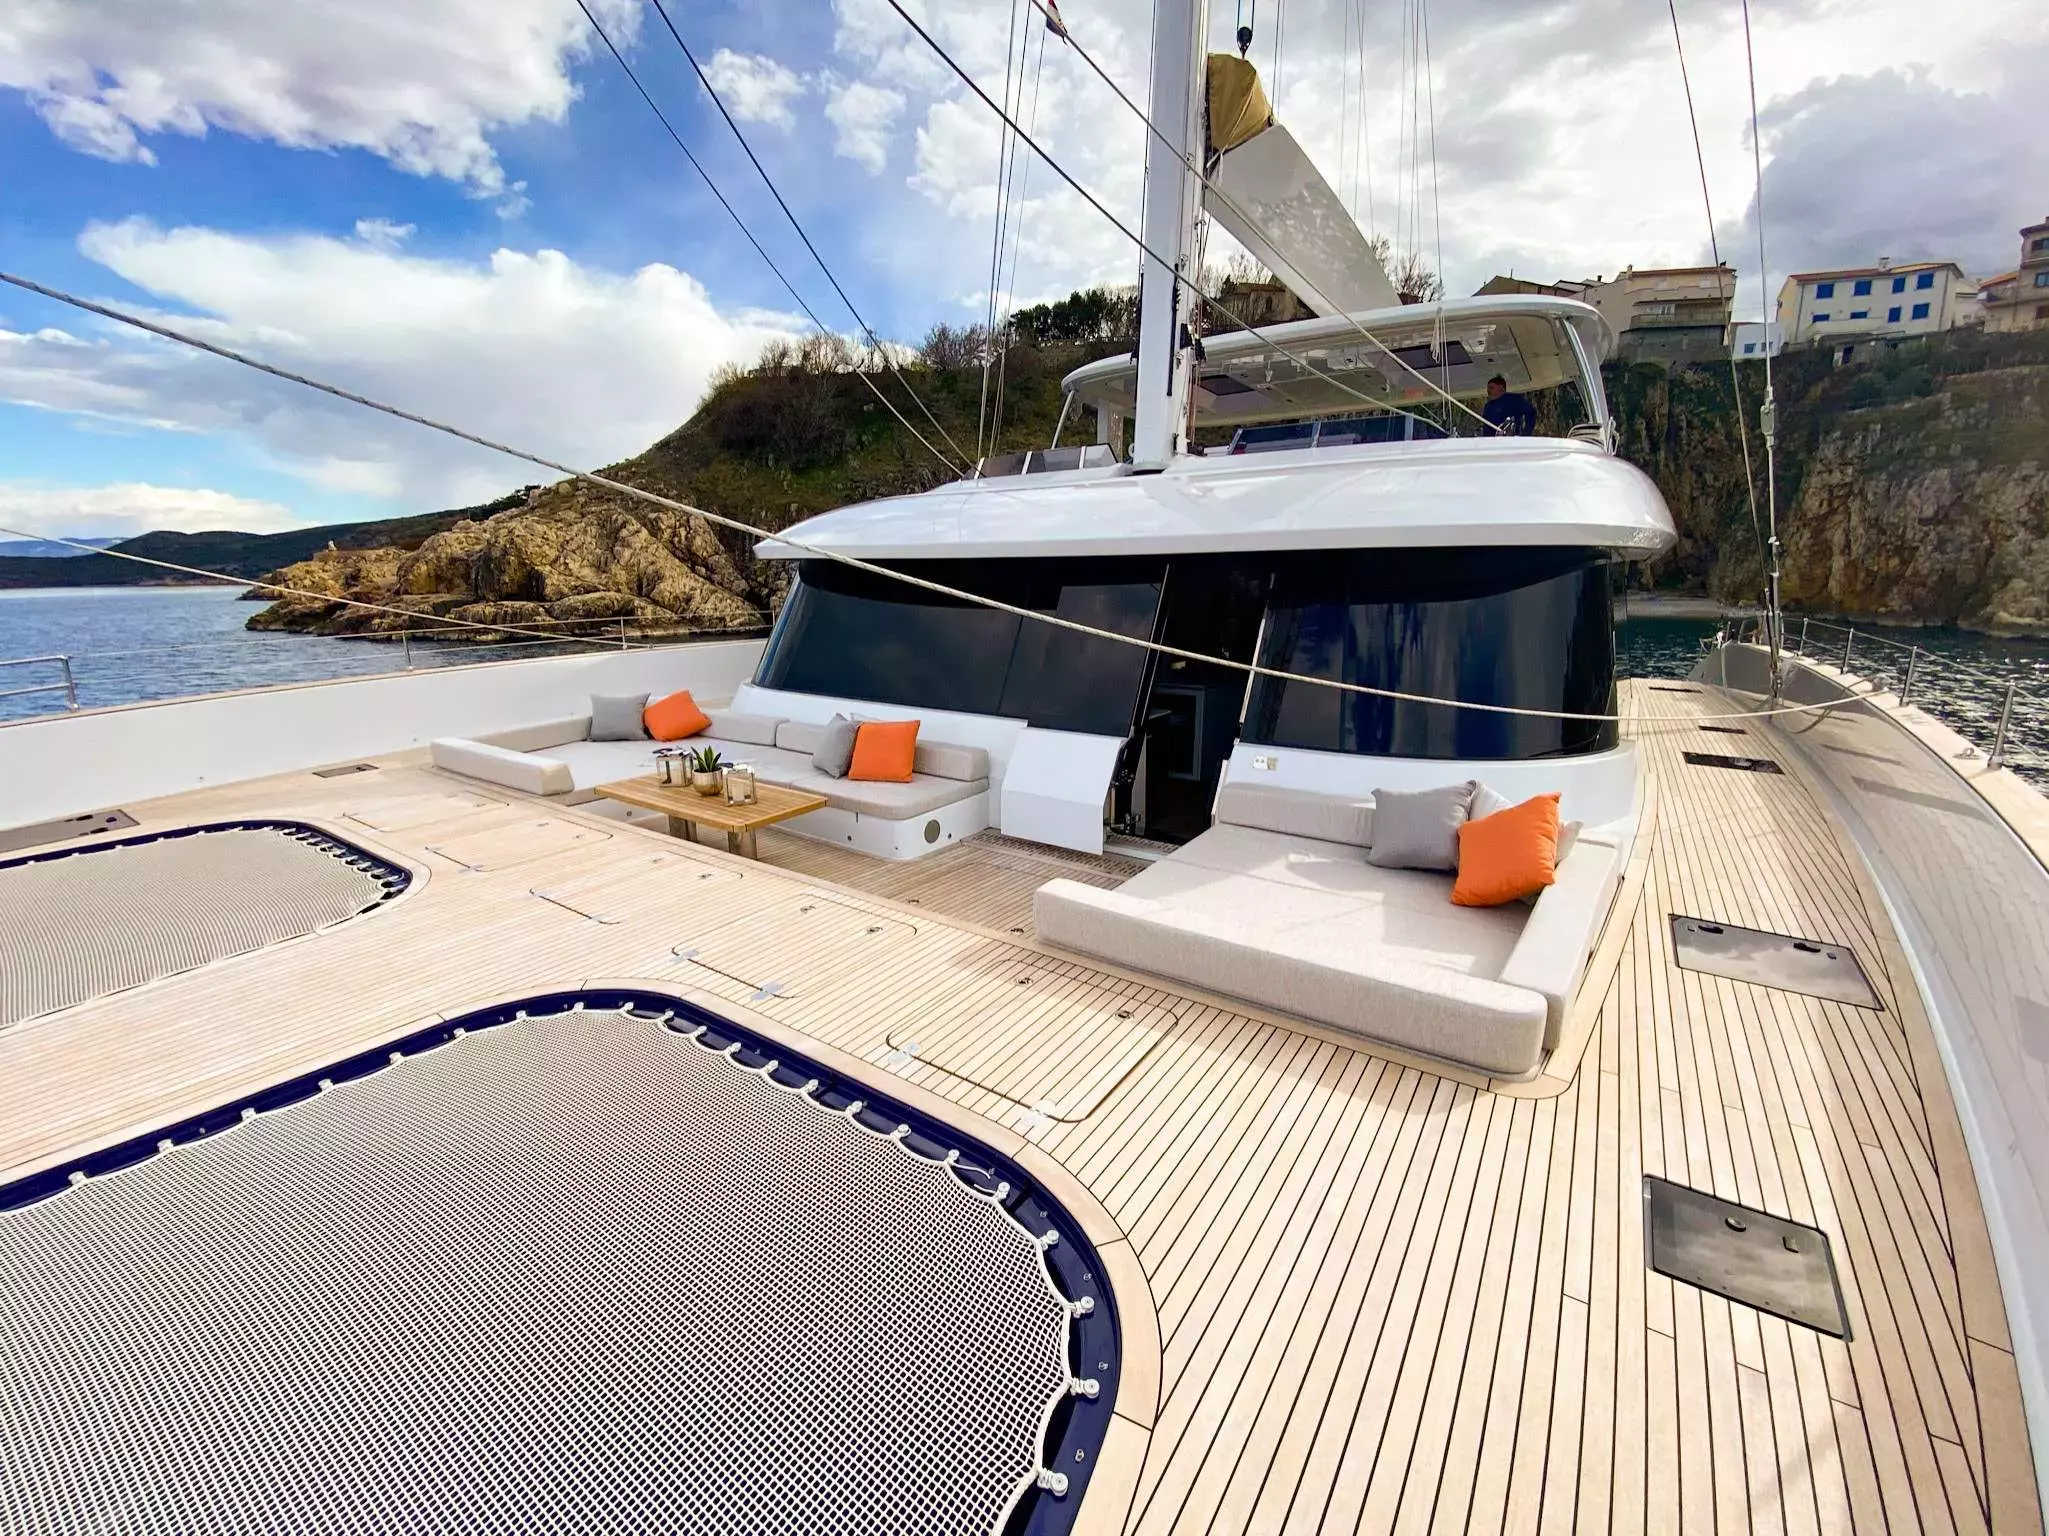 Fantastic Too by Sunreef Yachts - Top rates for a Charter of a private Luxury Catamaran in Barbados